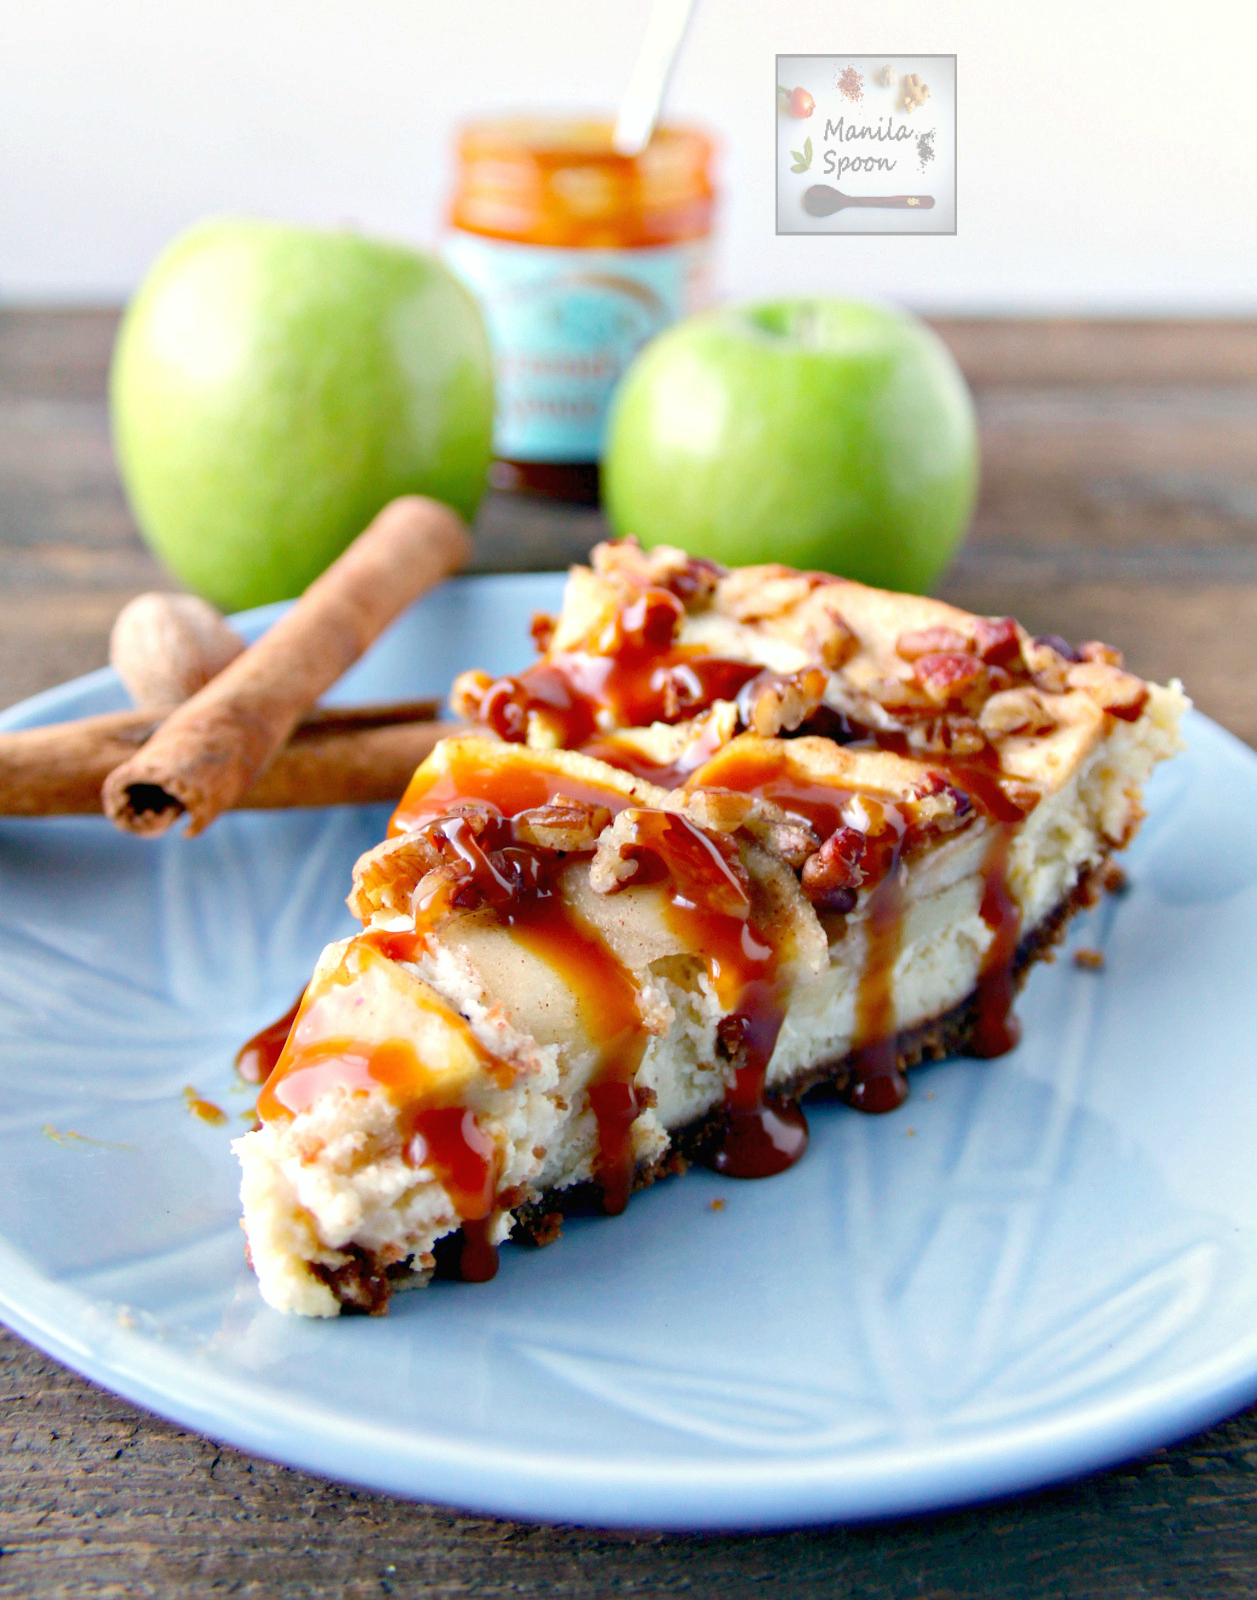 This easy and luscious fruity dessert combines the flavors of Apple Pie and Cheesecake so you can enjoy both! Make it ahead for fuss-free entertaining. Drizzle some caramel sauce on top for extra yum! | manilaspoon.com